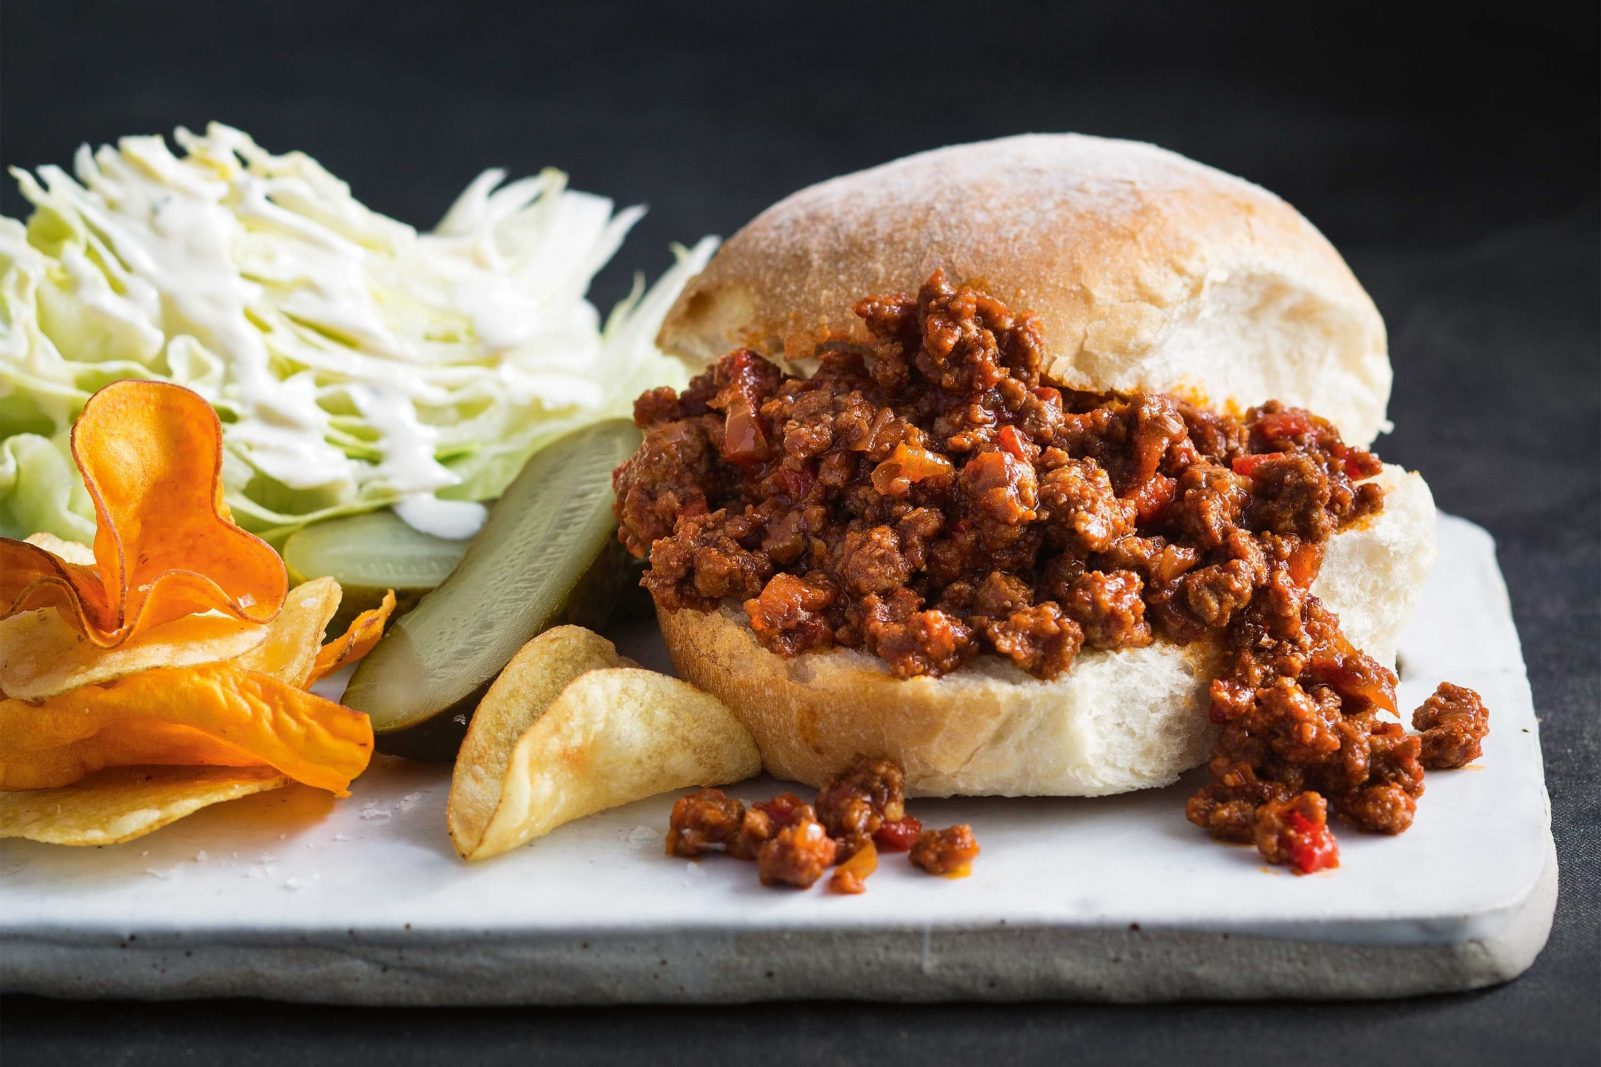 What Will Your Next Boyfriend Be Like? Make Some Tough Food Choices to Find Out Sloppy Joe sandwich